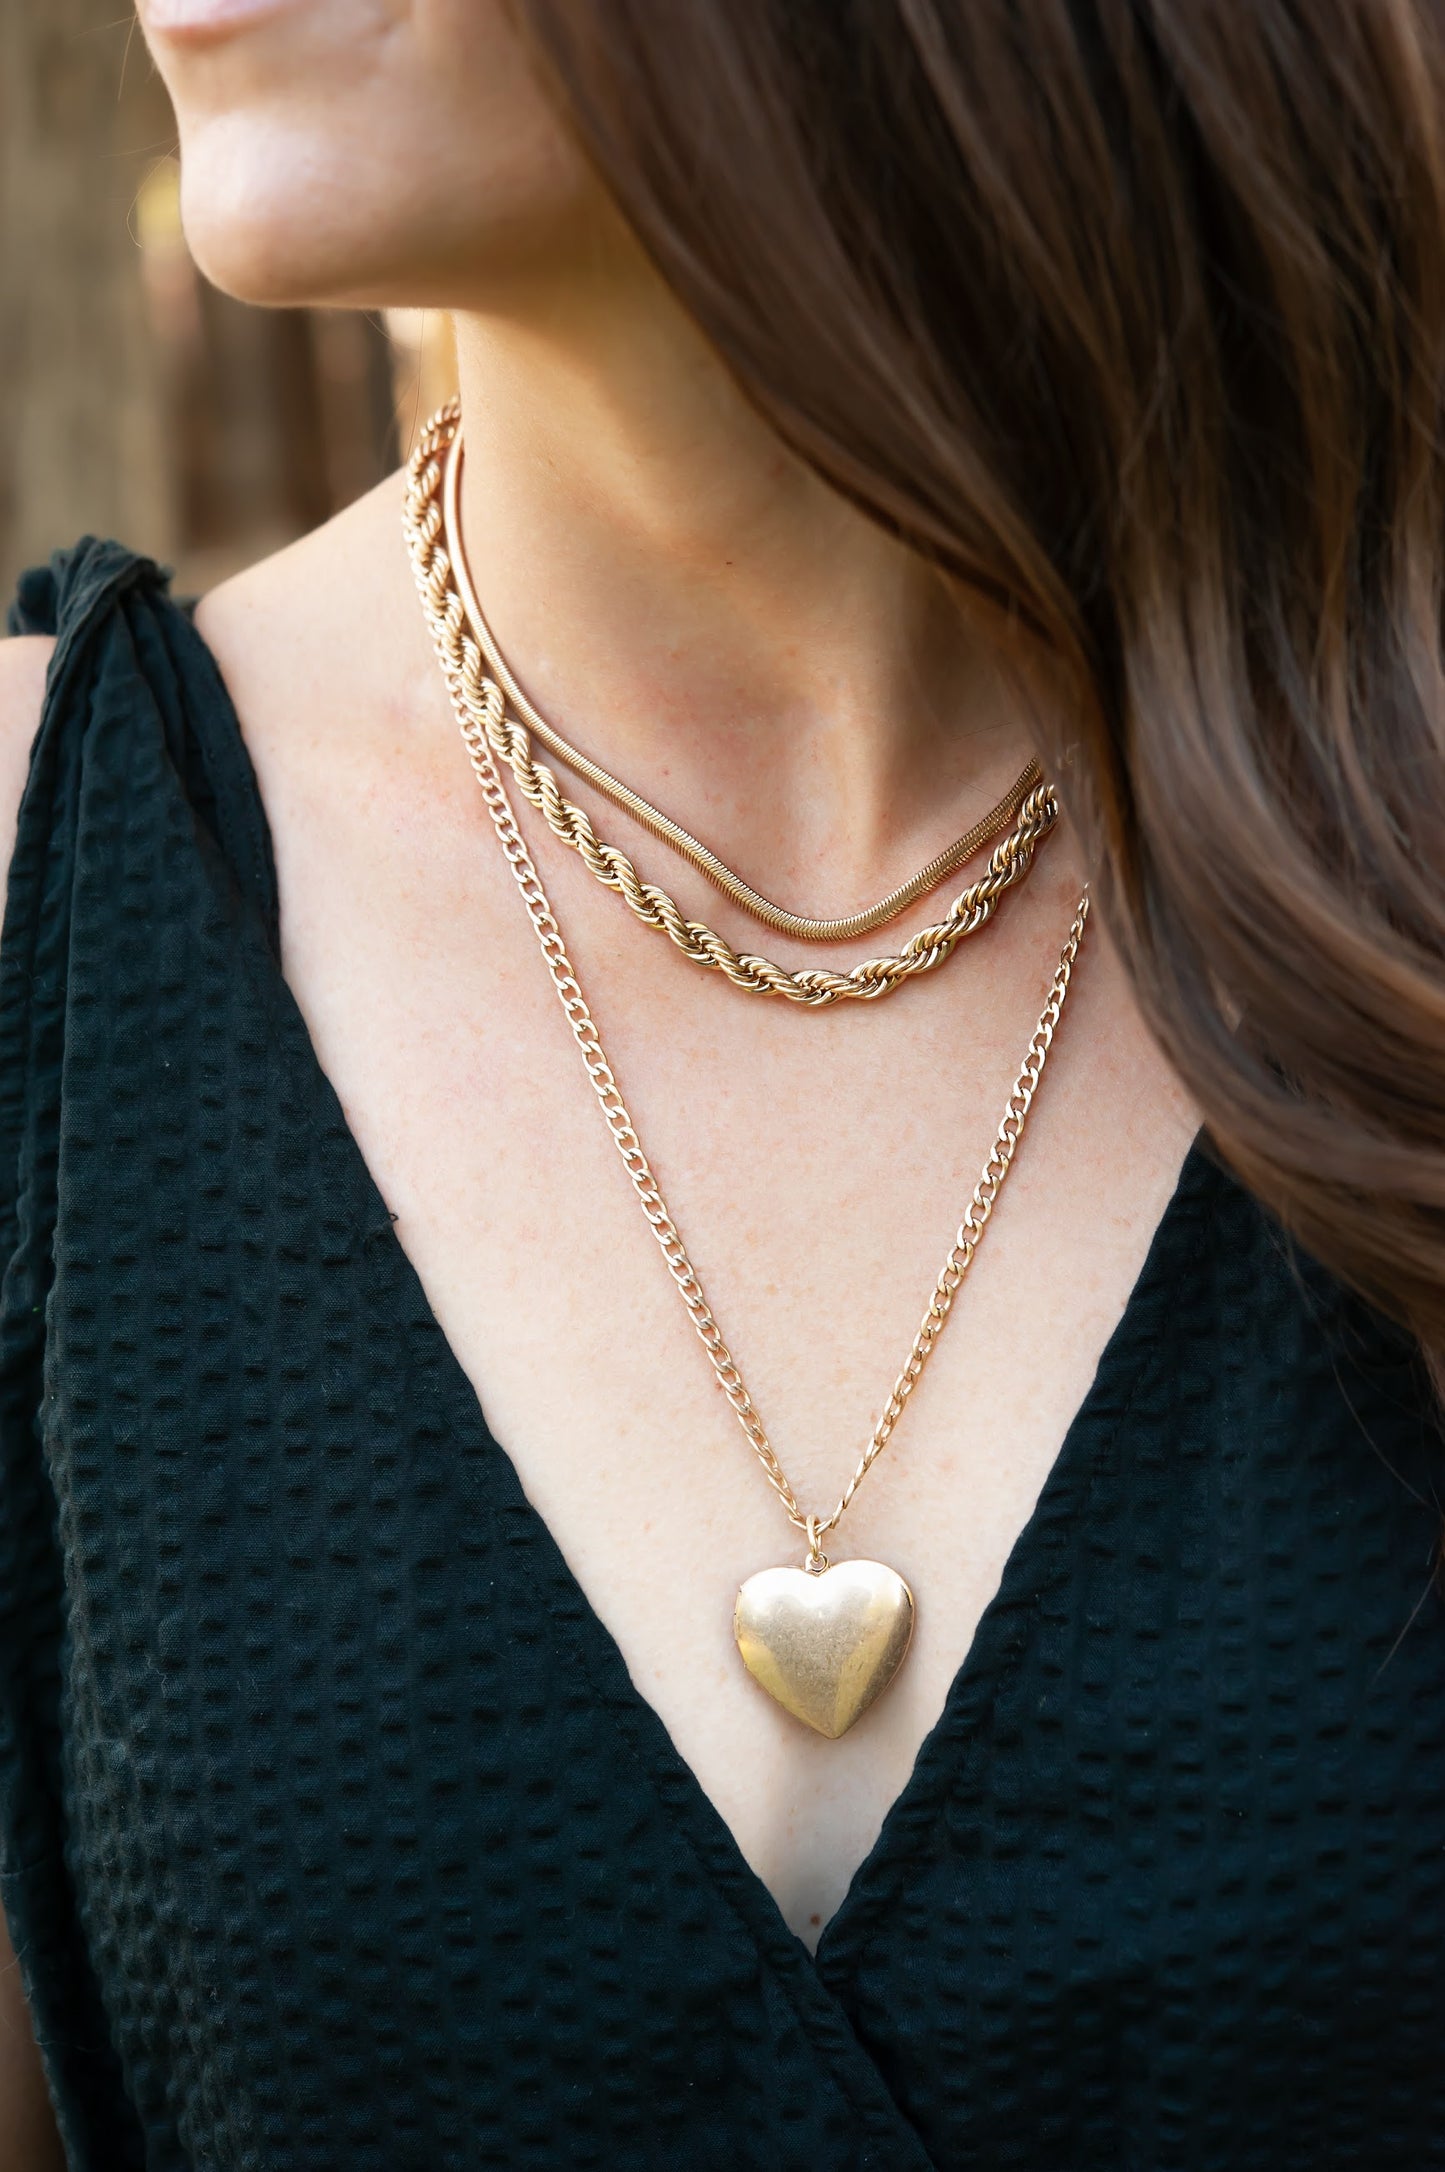 Load image into Gallery viewer, Love Locket Gold Necklace | Gold Chain Layering Necklace | Heart Locket Pendant | Classic Minimalist Layering Jewelry
